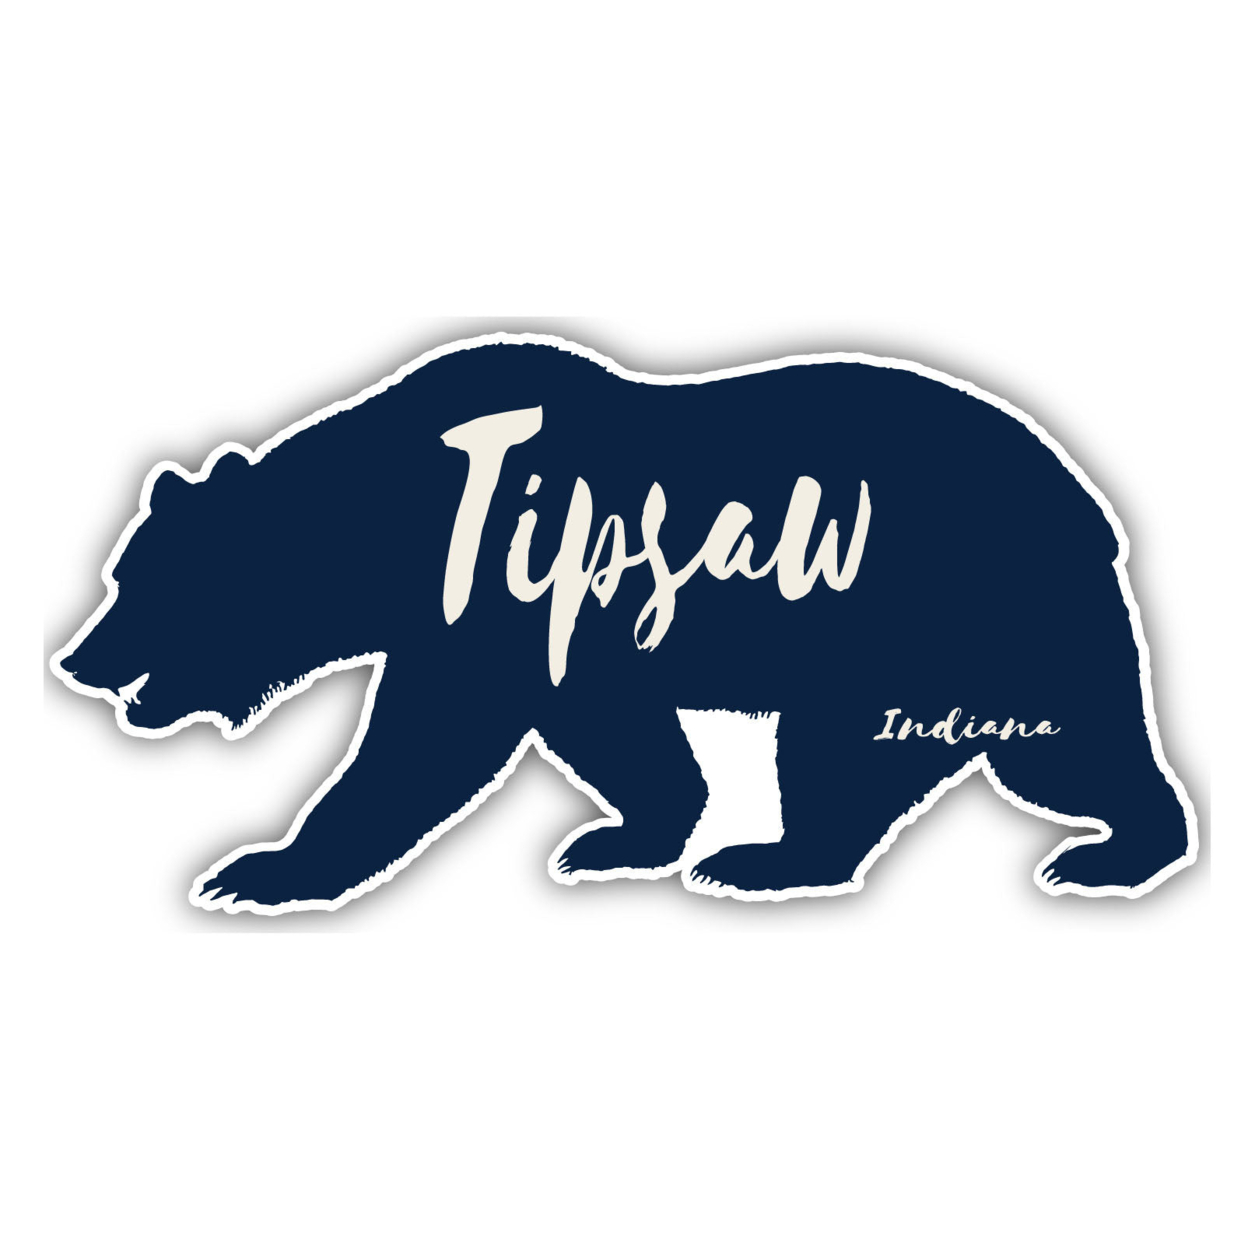 Tipsaw Indiana Souvenir Decorative Stickers (Choose Theme And Size) - Single Unit, 2-Inch, Bear